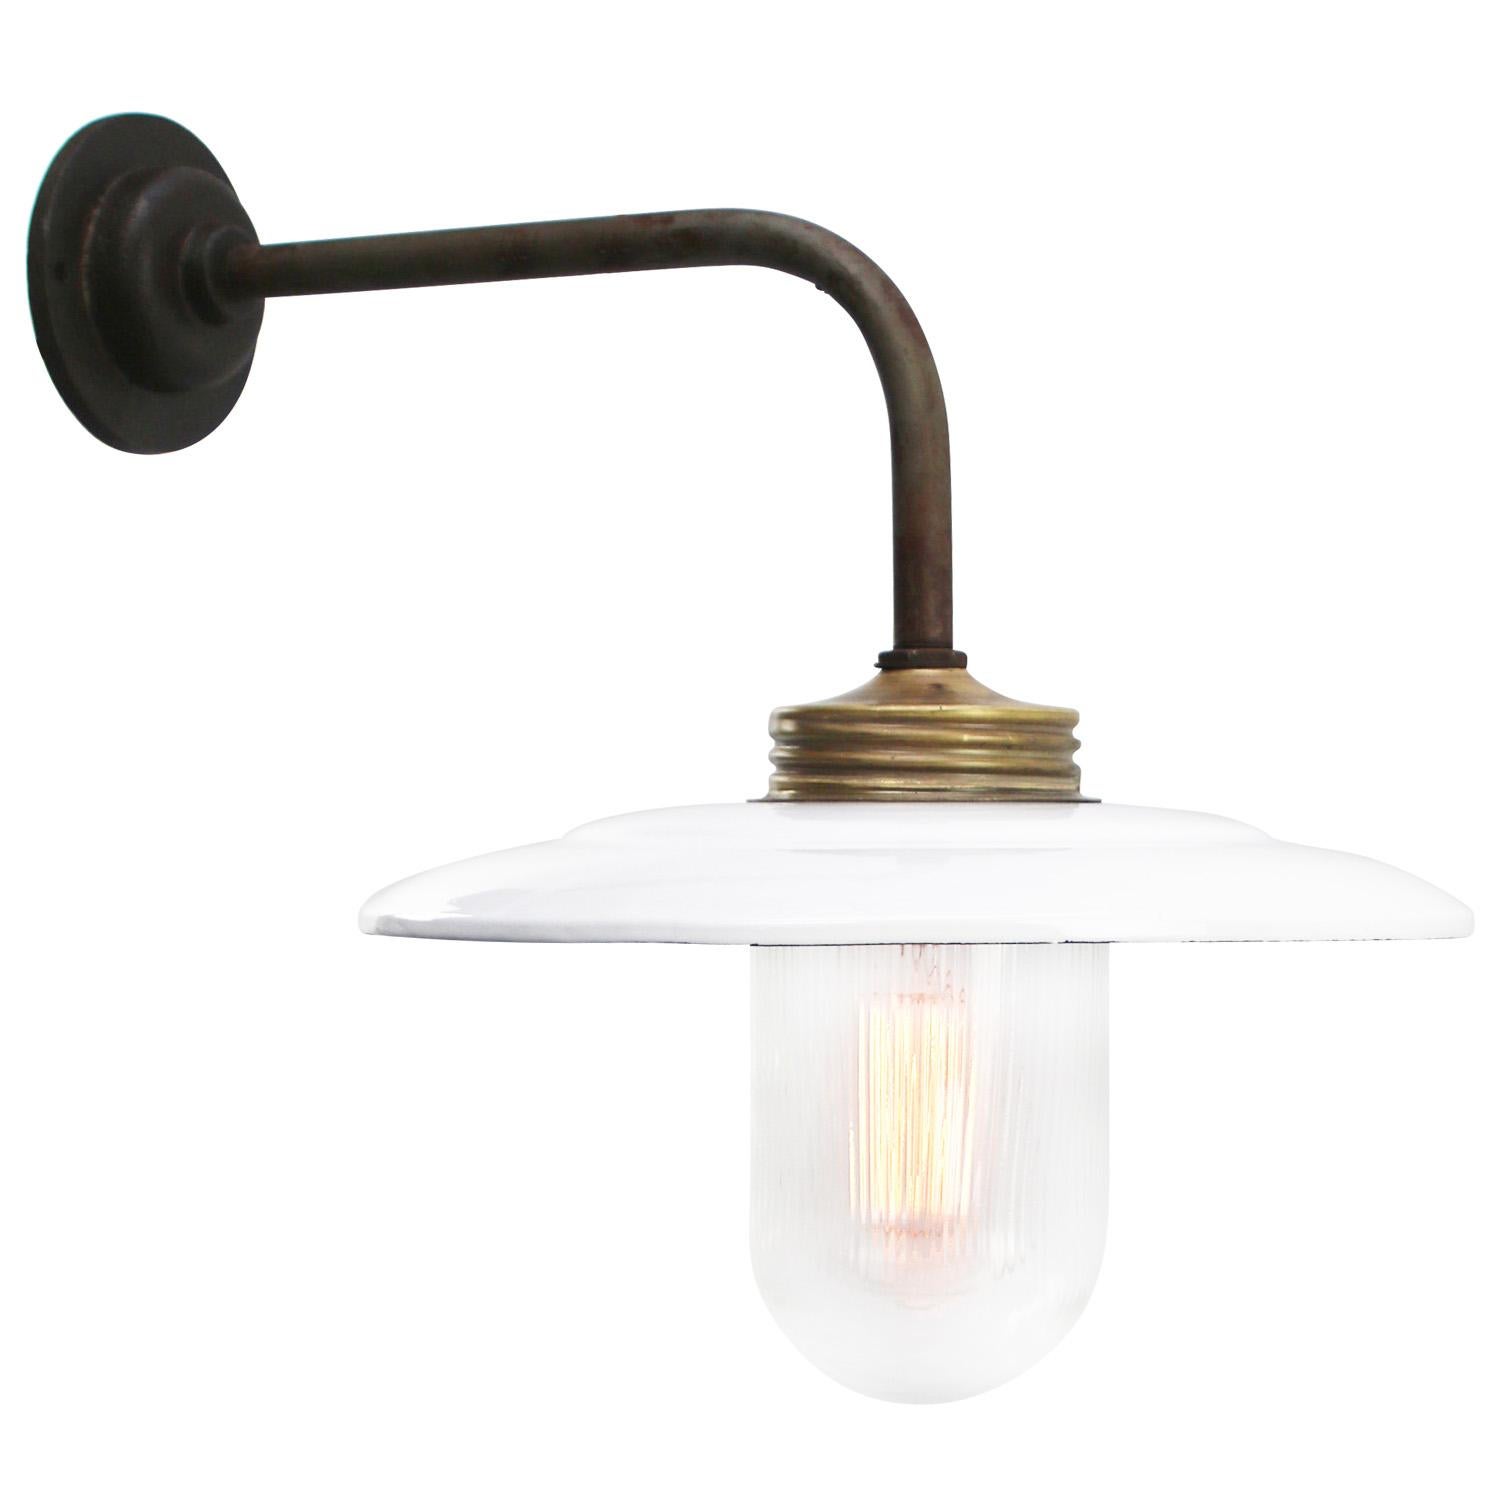 Rust Cast Iron Barn light
white enamel, white interior, clear striped glass

Diameter cast iron wall piece: 10.5 cm / 4 inches
2 holes to secure

Weight: 2.00 kg / 4.4 lb

Priced per individual item. All lamps have been made suitable by